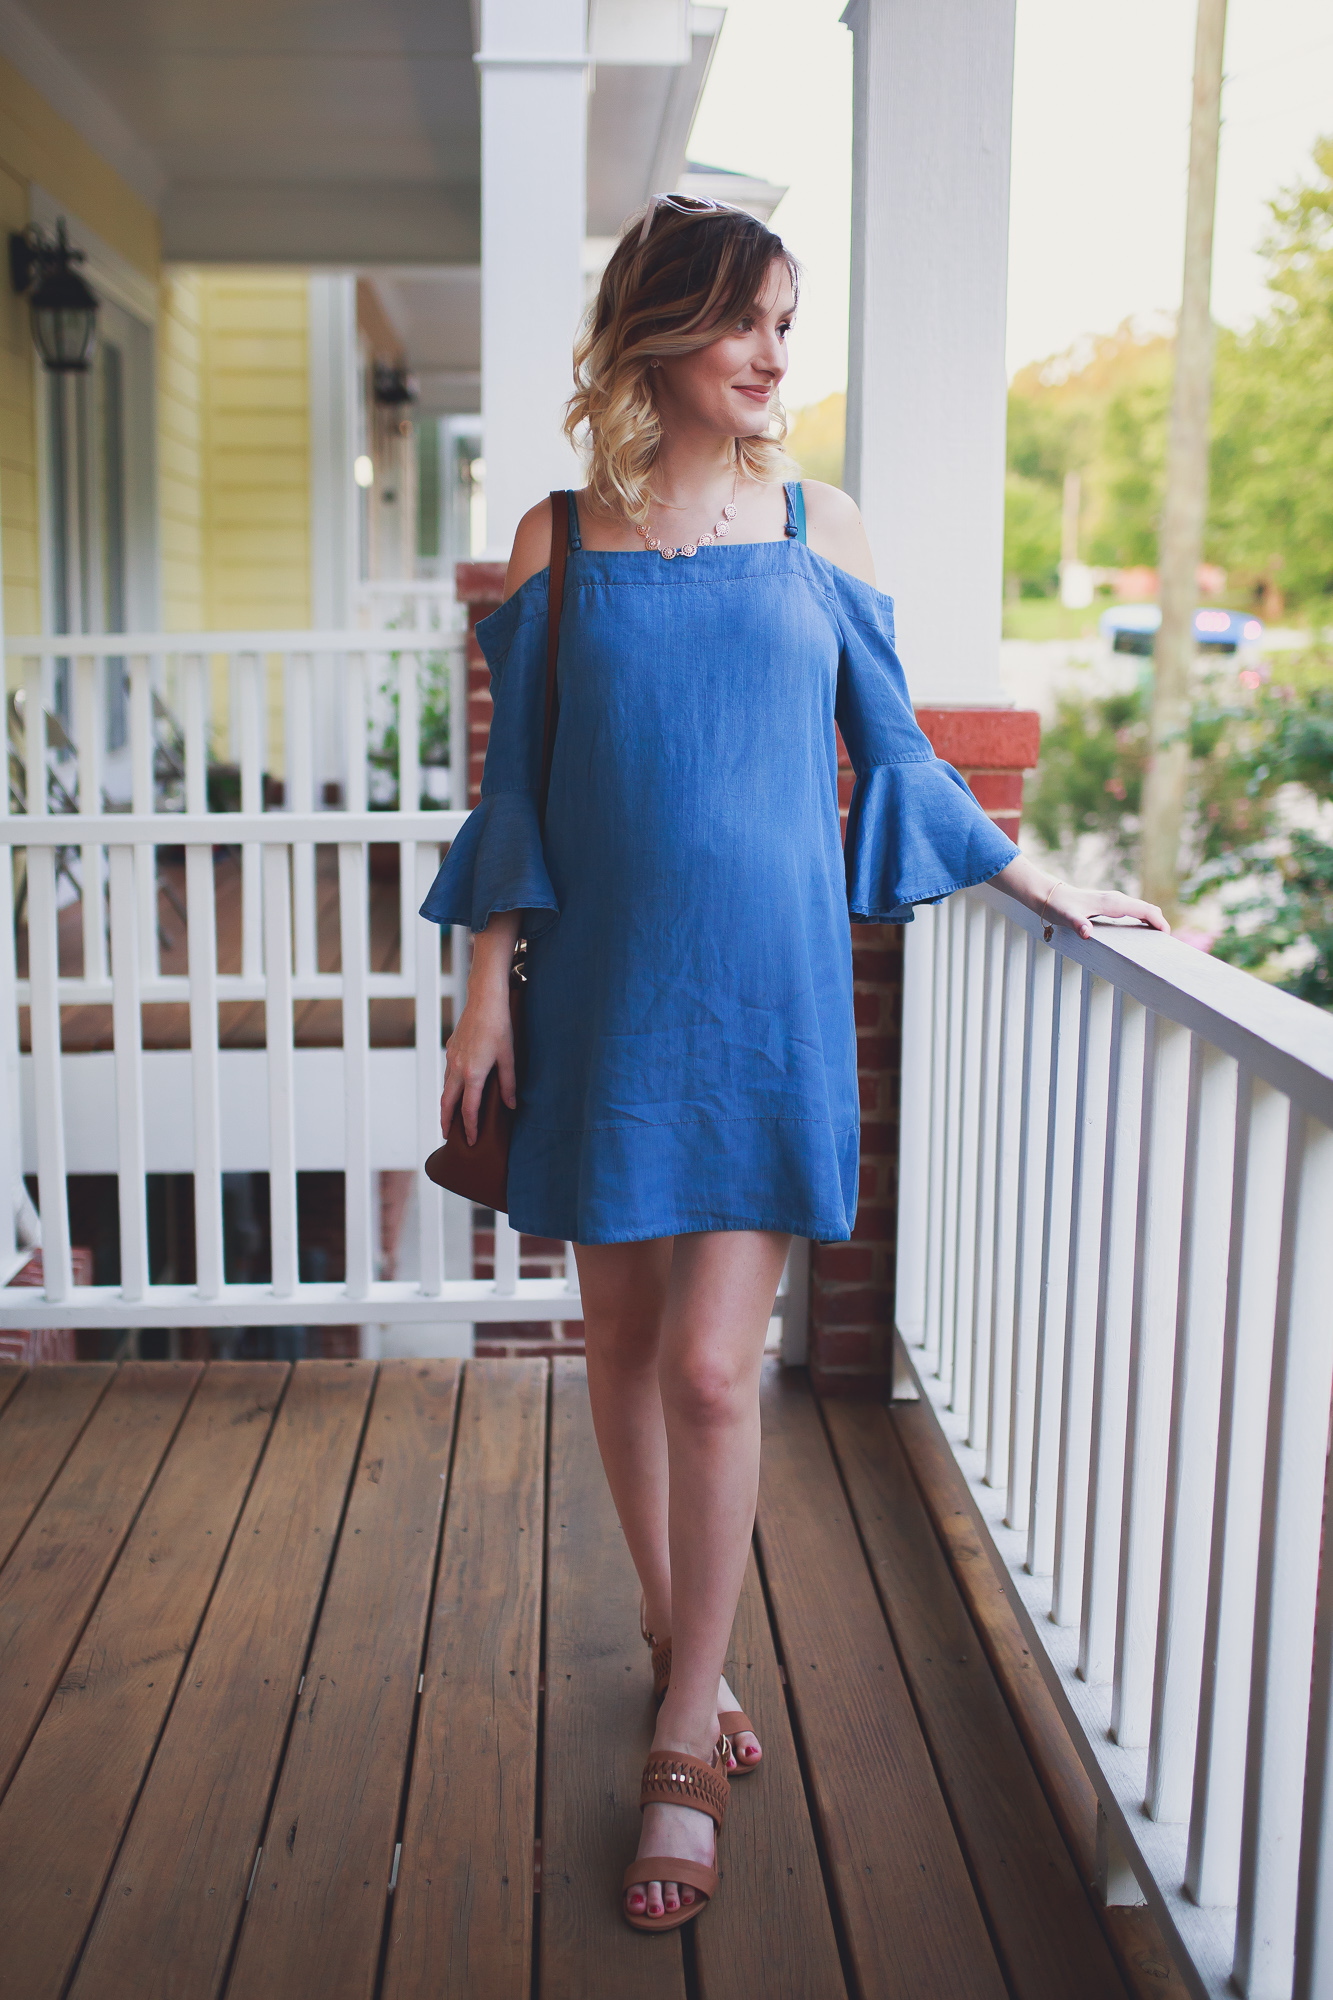 fashion, lifestyle, and beauty blogger and vlogger Jessica Linn from Linn Style wearing a chambray cold shoulder dress from Francesca's, brown heels from Matisse Footwear, a brown Michael Kors Bag, Necklace from Francesca's, and a bracelet from local North Carolina CY Design Studio. You don't have to wear only maternity clothes when you're pregnant. You can wear non-maternity maternity clothes!